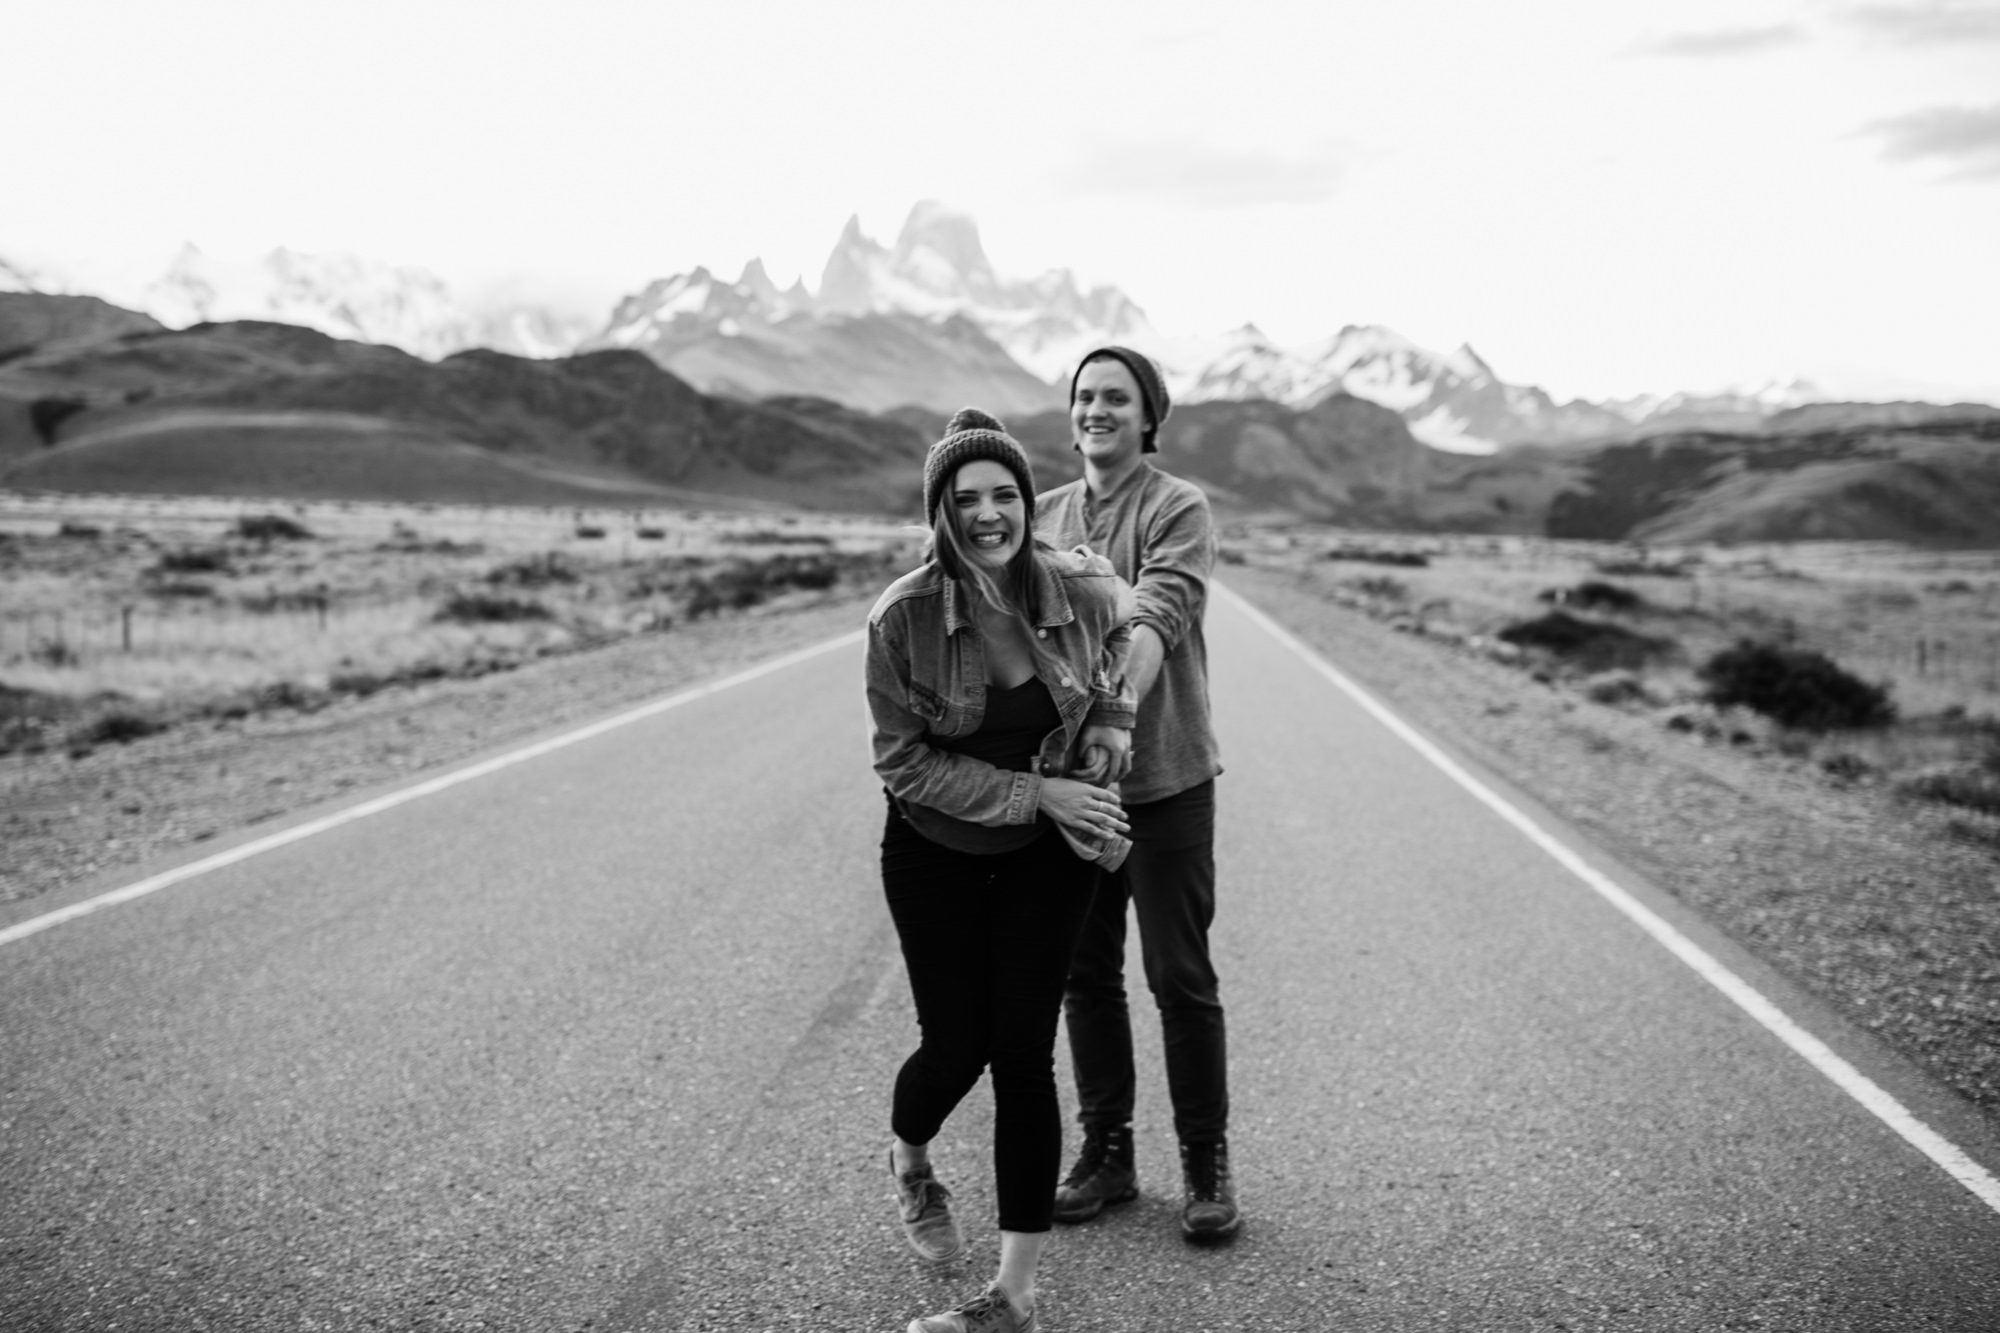 rich + anni's adventure travel session in el chalten | fitz roy, patagonia, argentina | patagonia destination elopement photographer | the hearnes adventure photography | www.thehearnes.com